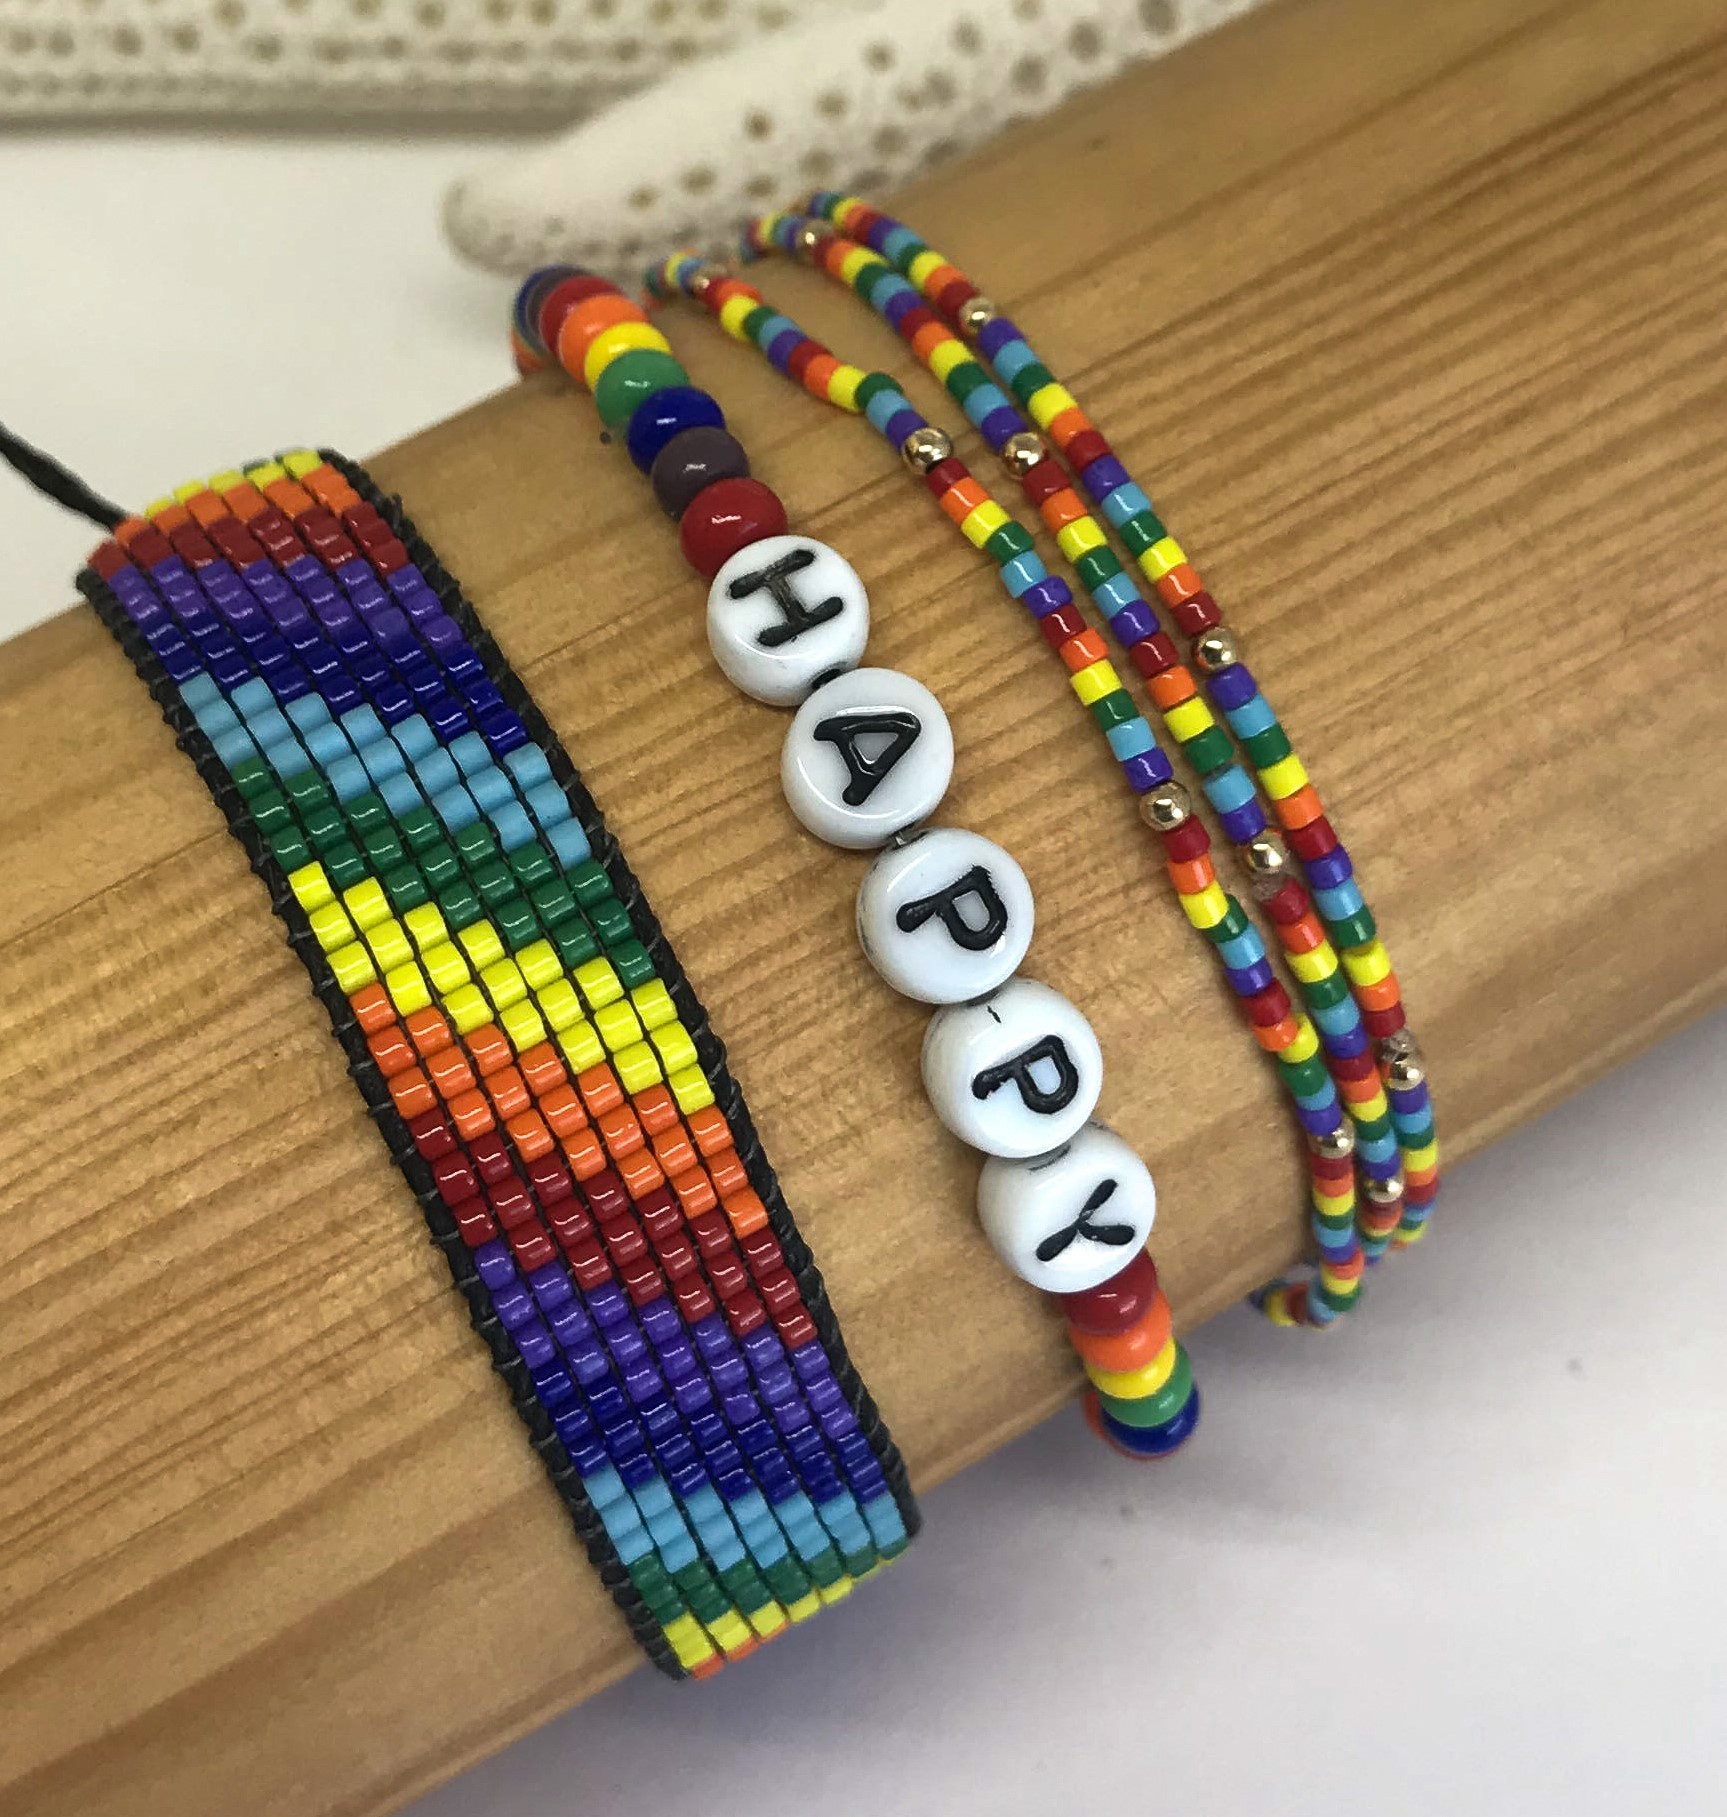 Rainbow Bracelet Woven Loom with Japanese Seed Beads Adjustable Waterproof  Jewelry. Made in USA – Just Bead It